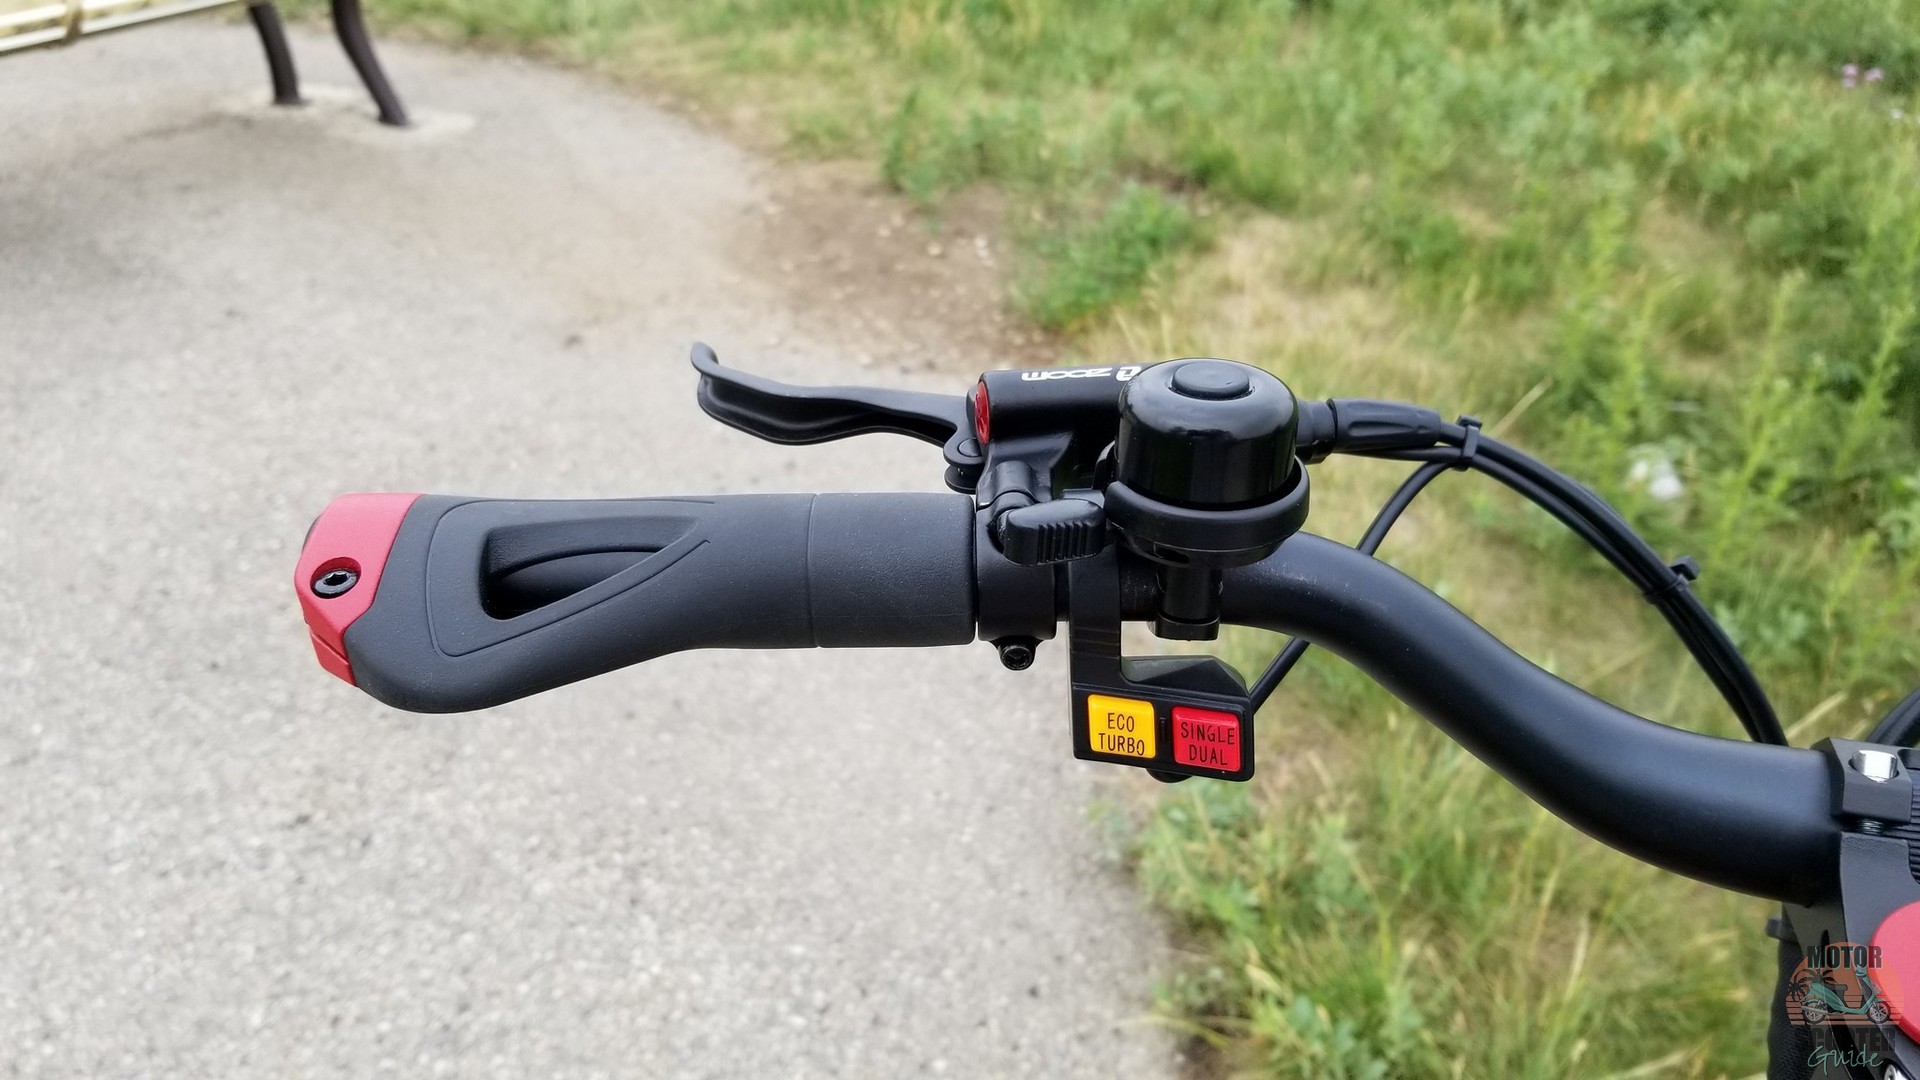 Left side of the handlebar showing two buttons for power and motor settings